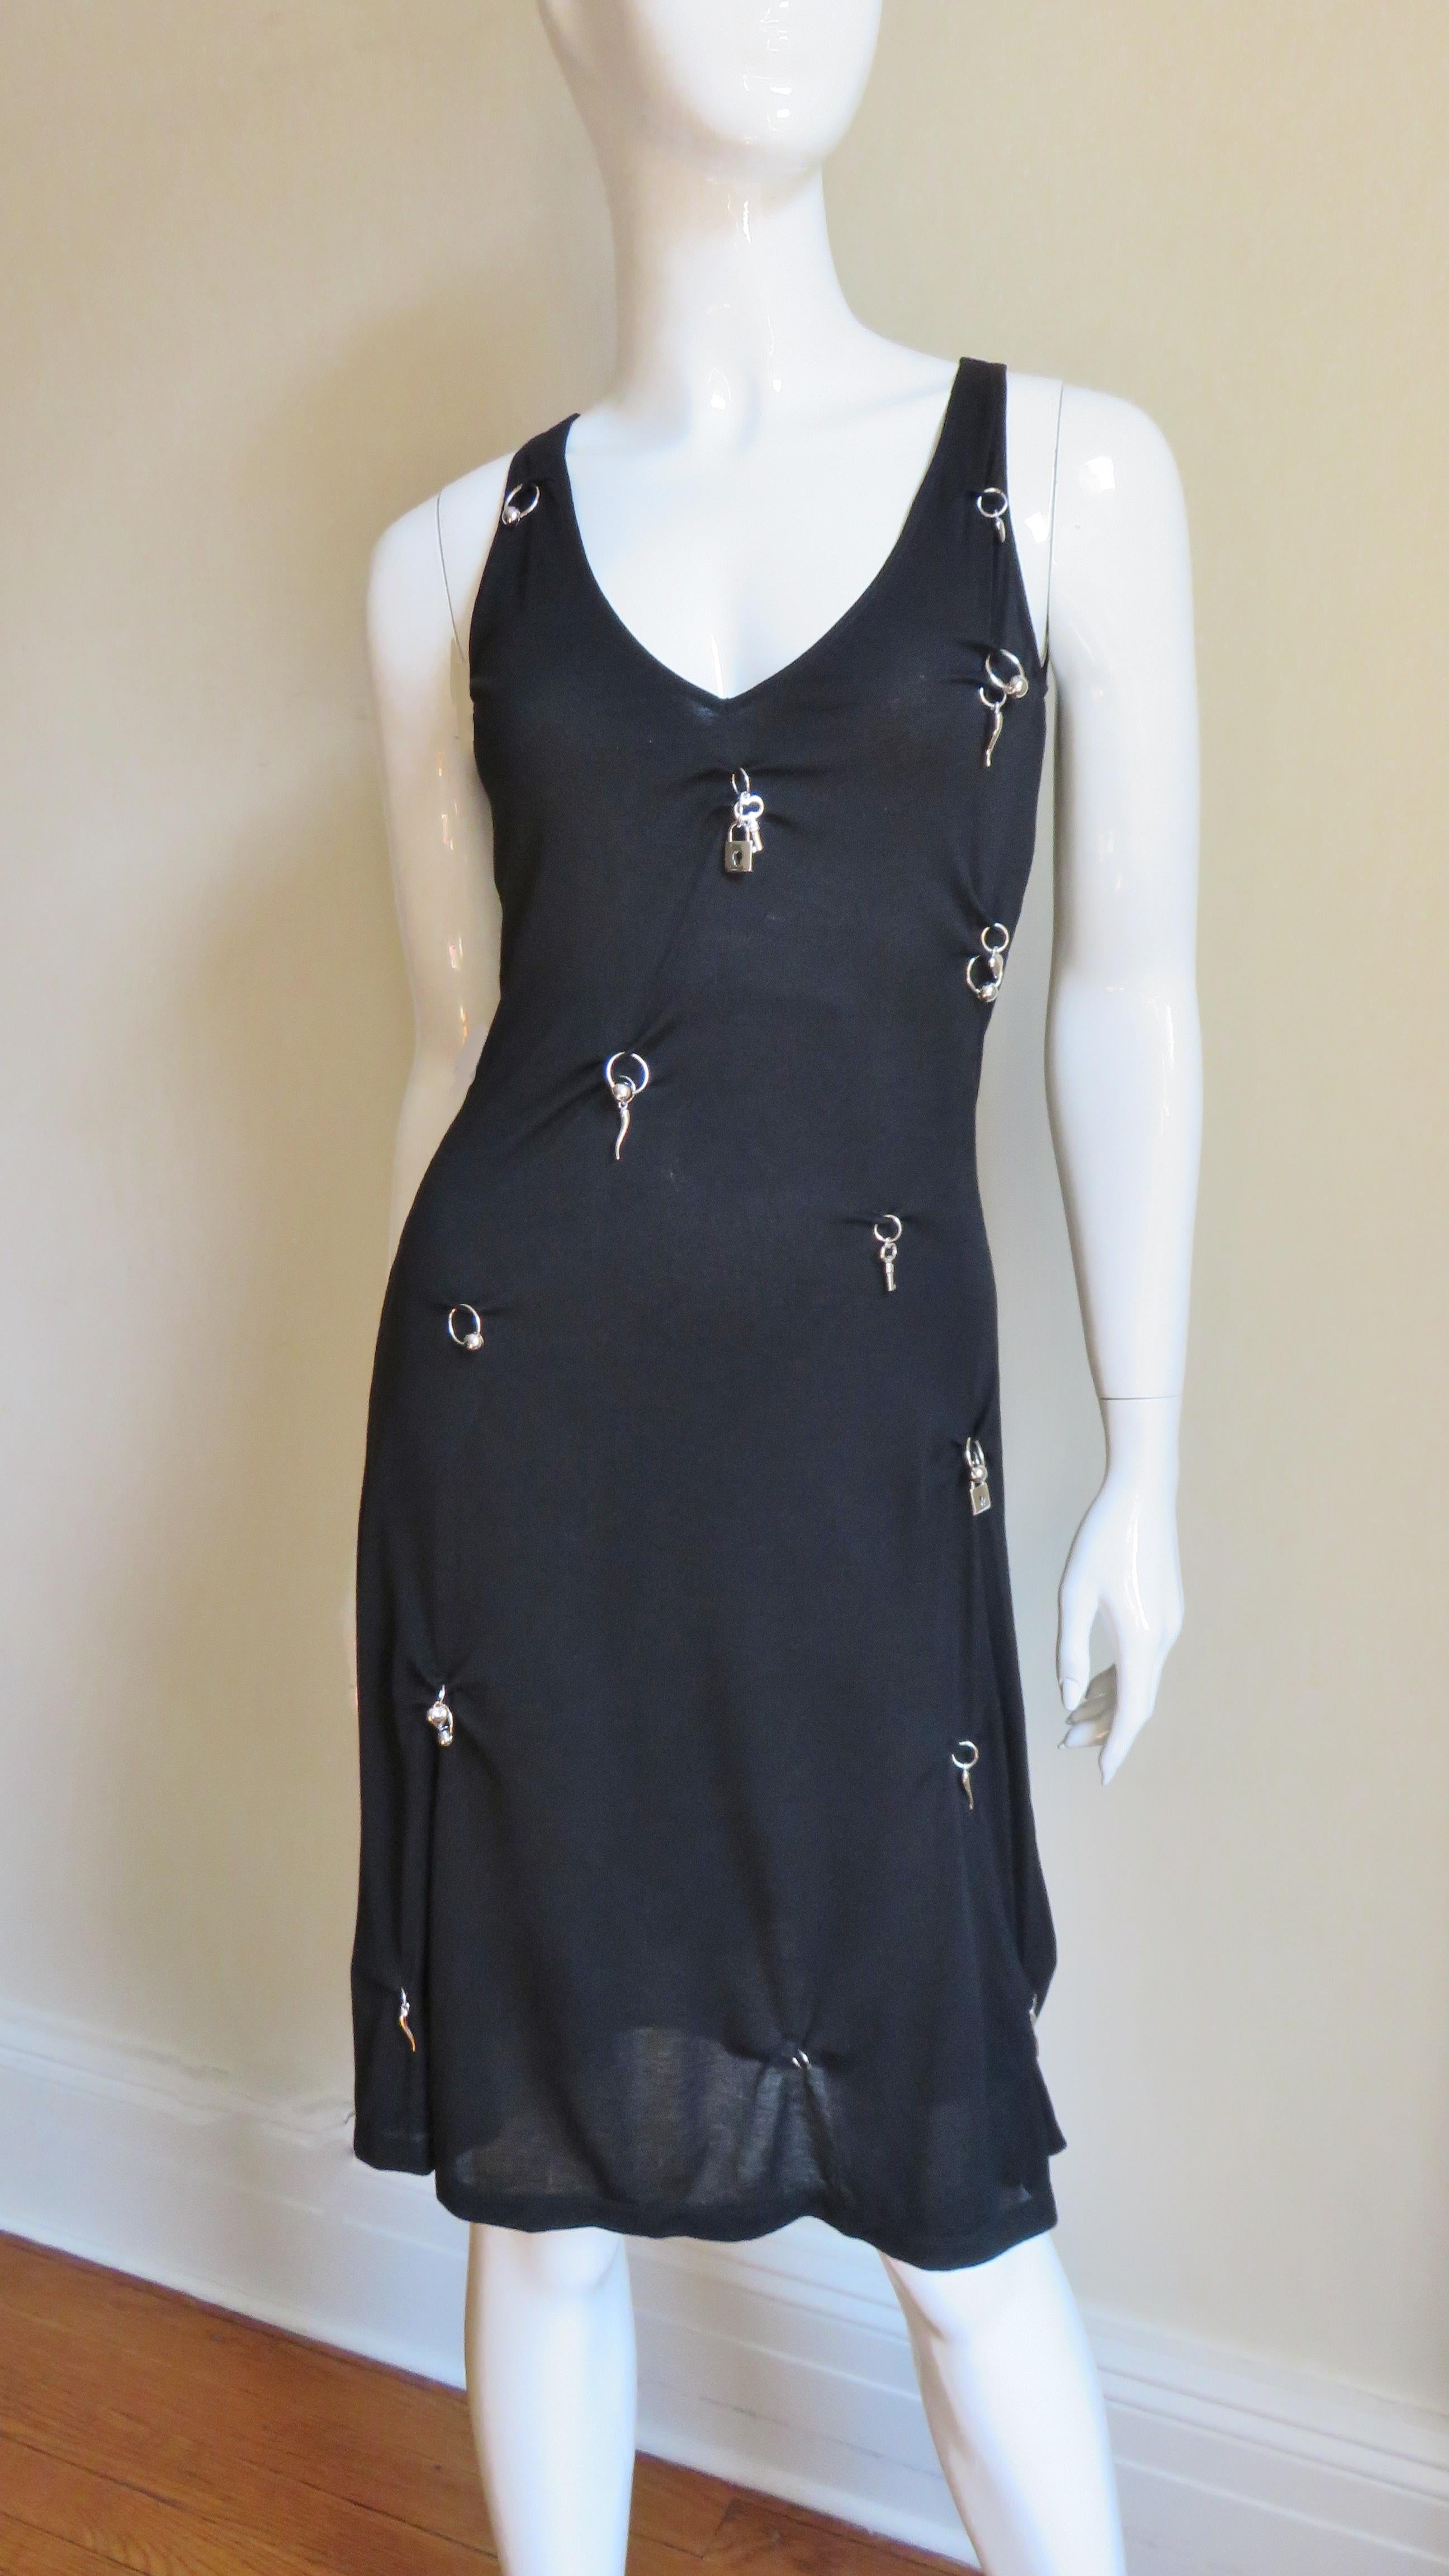 A great black knit dress from Moschino with scattered silver metal charm keys, locks and hearts on the front.  The V neck dress is simple, fitted to waist then flaring to the hem. It is unlined.
Fits sizes Extra Small, Small, Medium.

Bust 